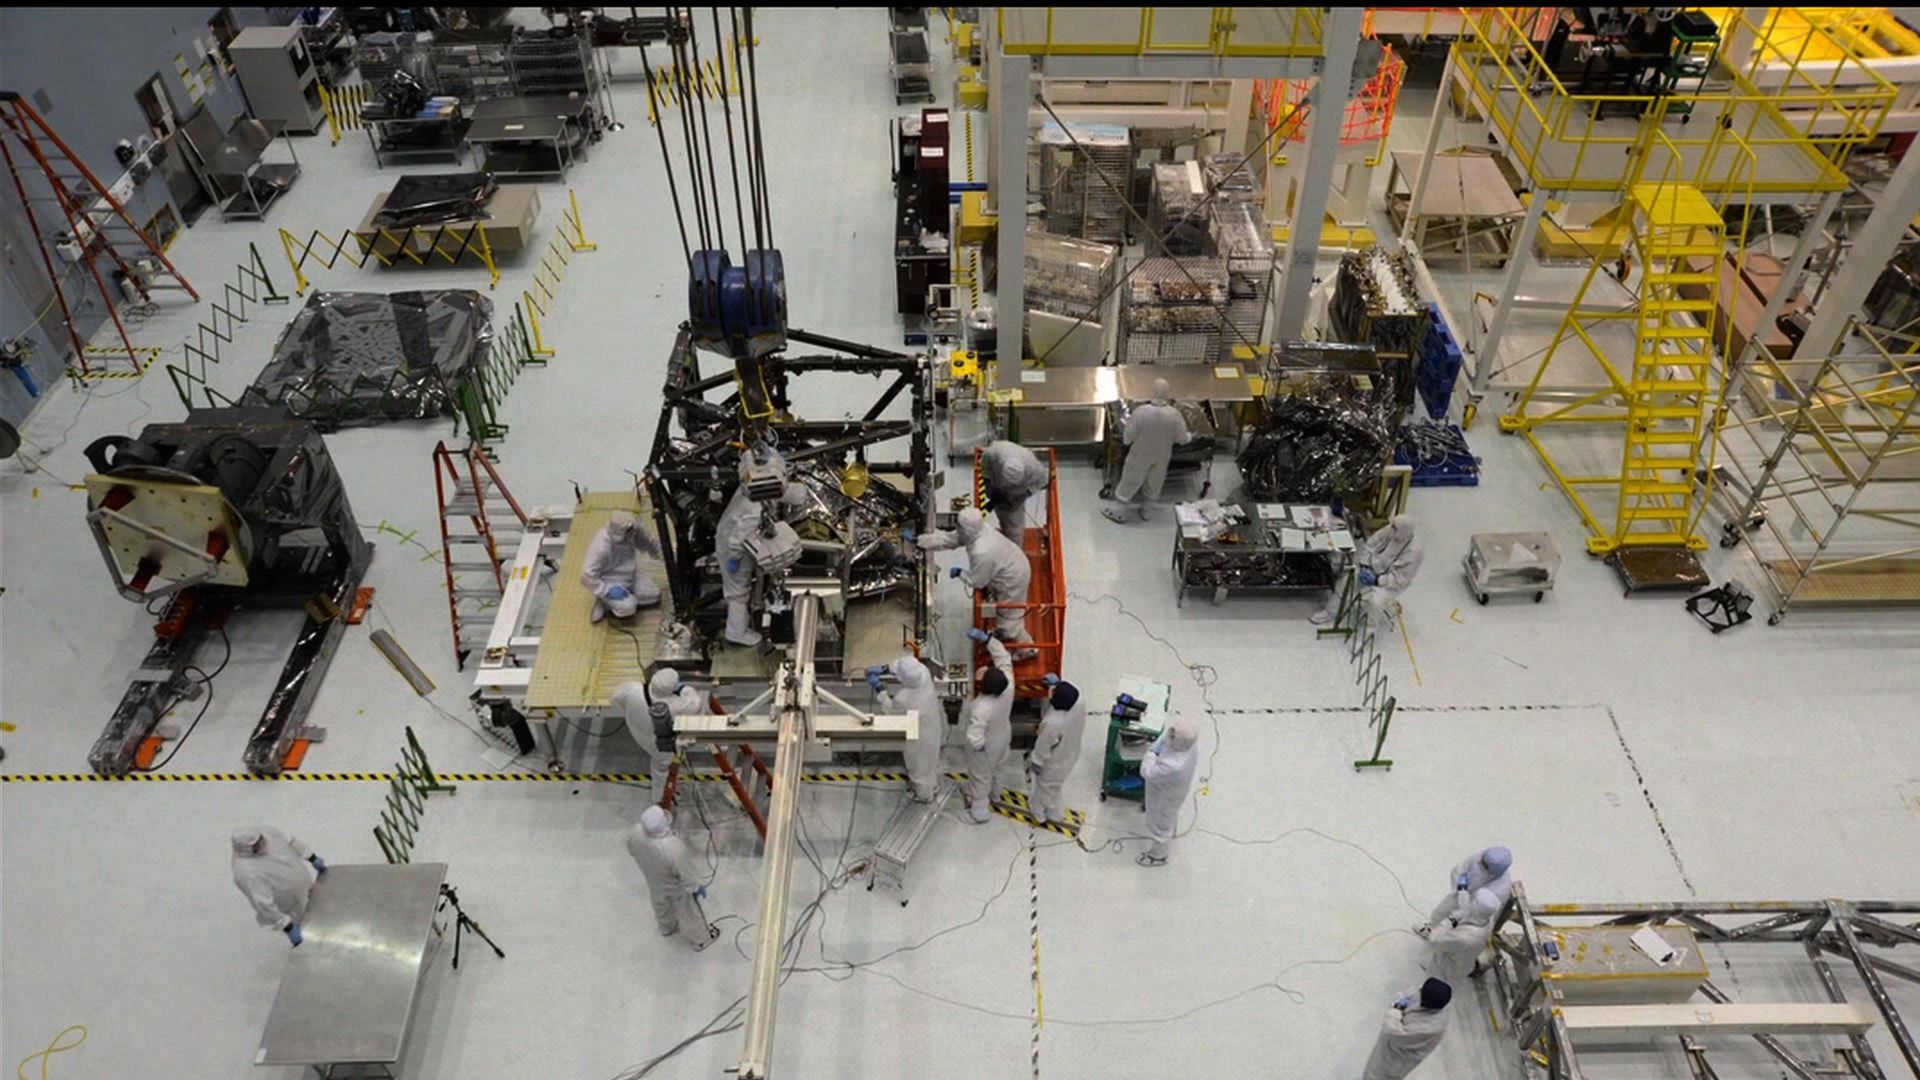 A time lapse of the Webb Telescope's Mid InfraRed Instrument (MIRI) being installed into the Integrated Science Instrument Module (ISIM) by engineers at NASA Goddard Spacea Flight Center in Greenbelt, Maryland.  (no audio)